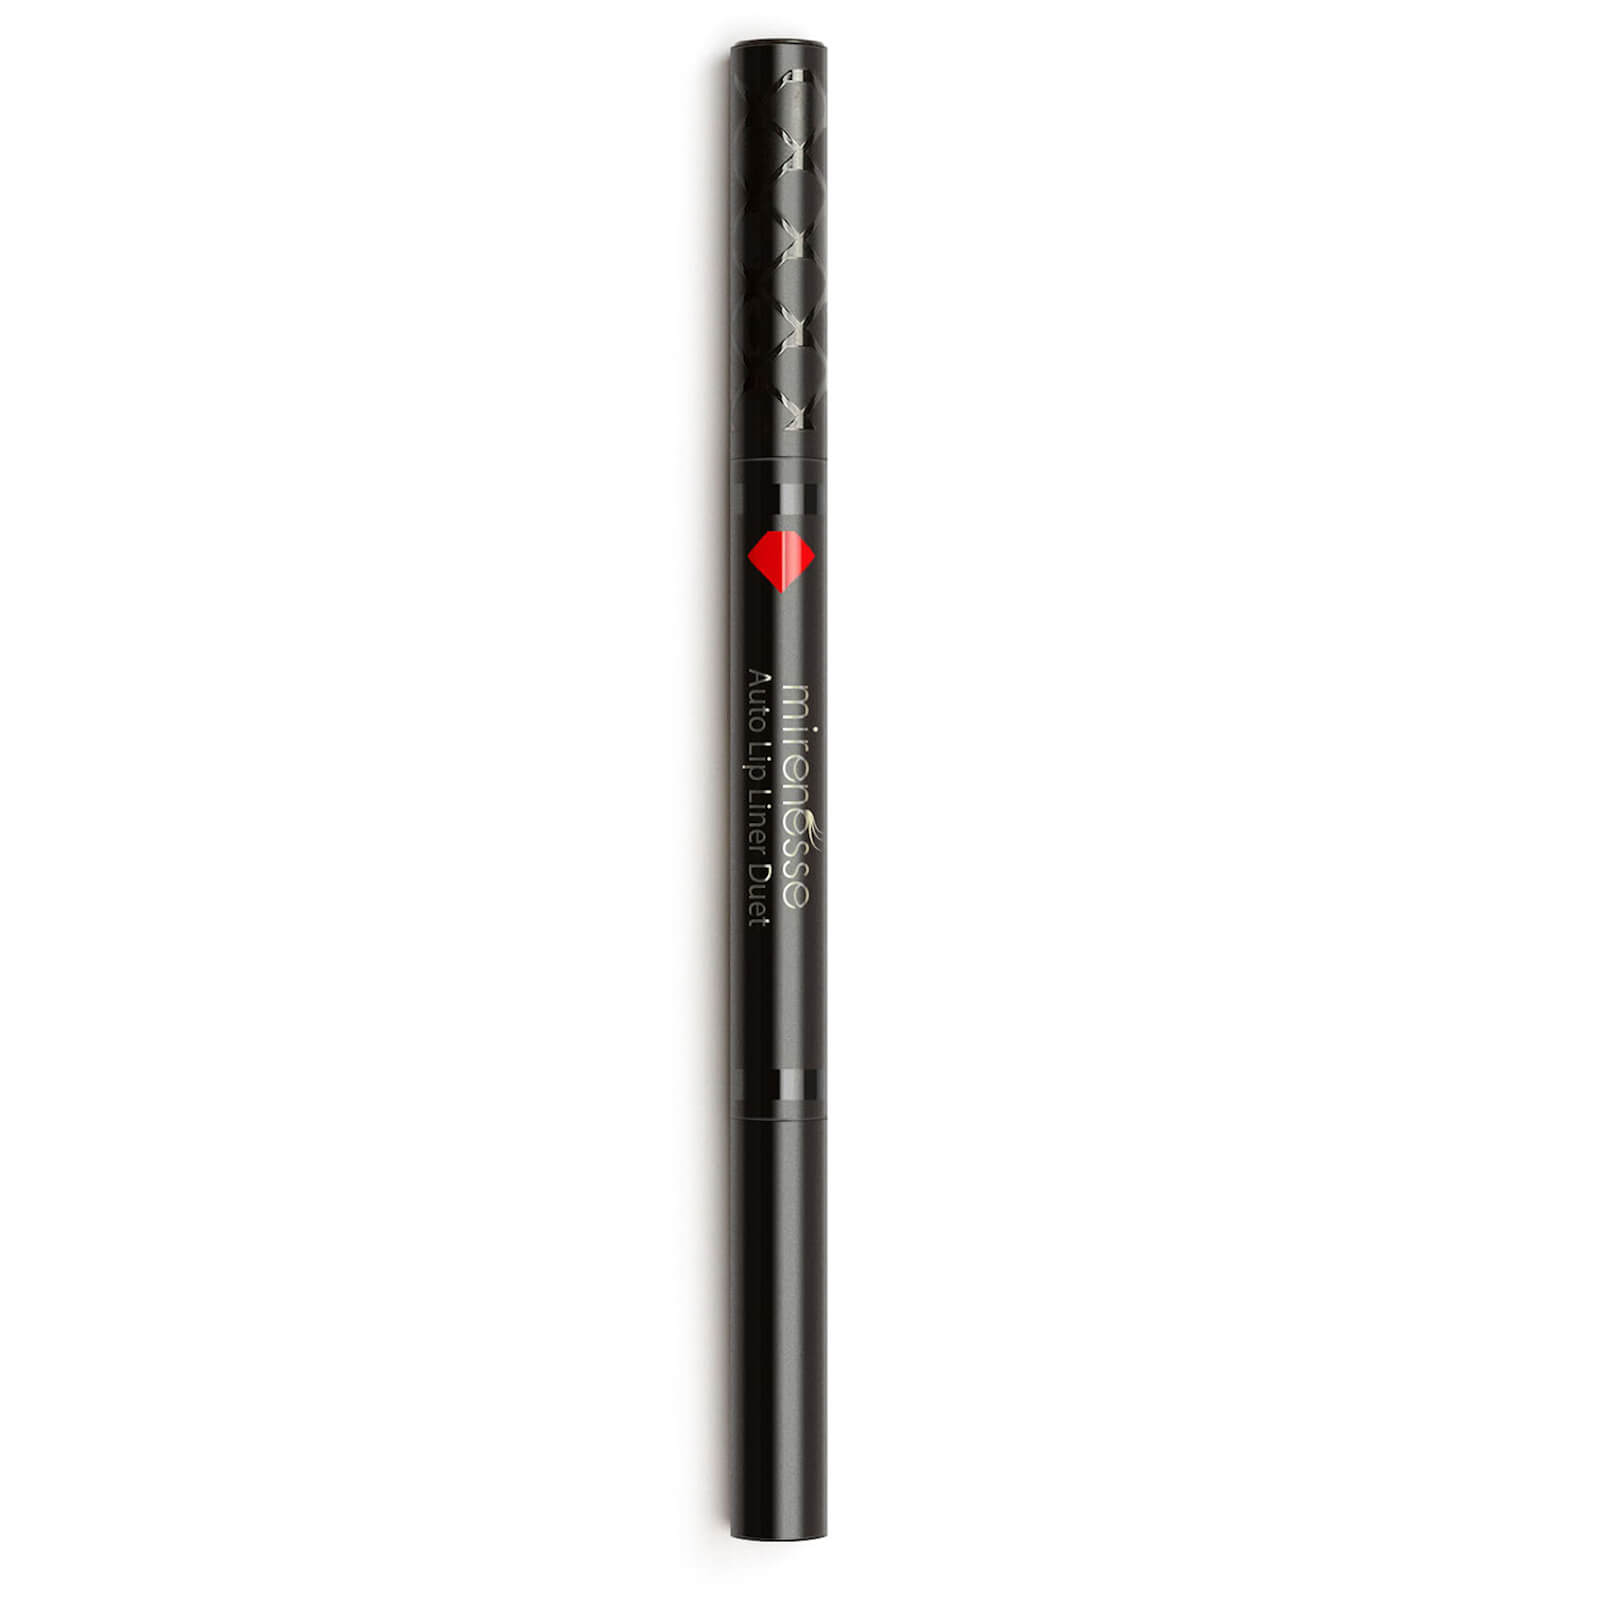 mirenesse Auto Lip Liner Long Wear Duet 0.5g (Various Shades) - Racy Reds